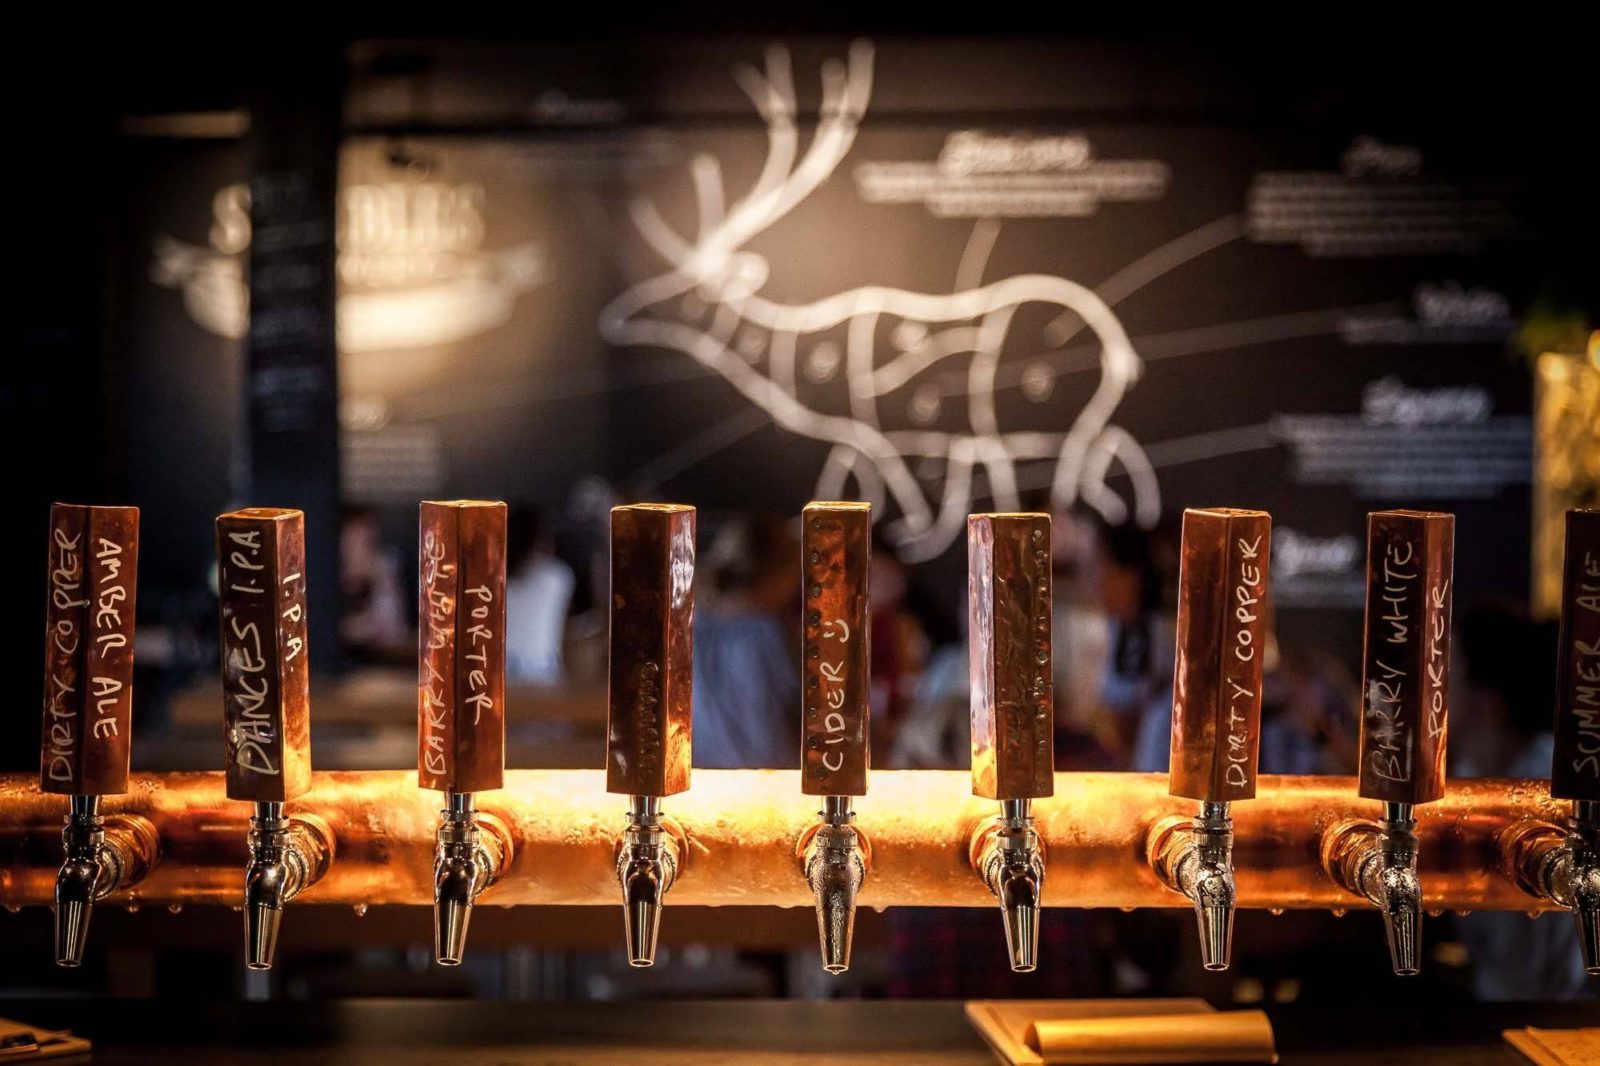 Copper taps at our main bar with our logo painted on the back all